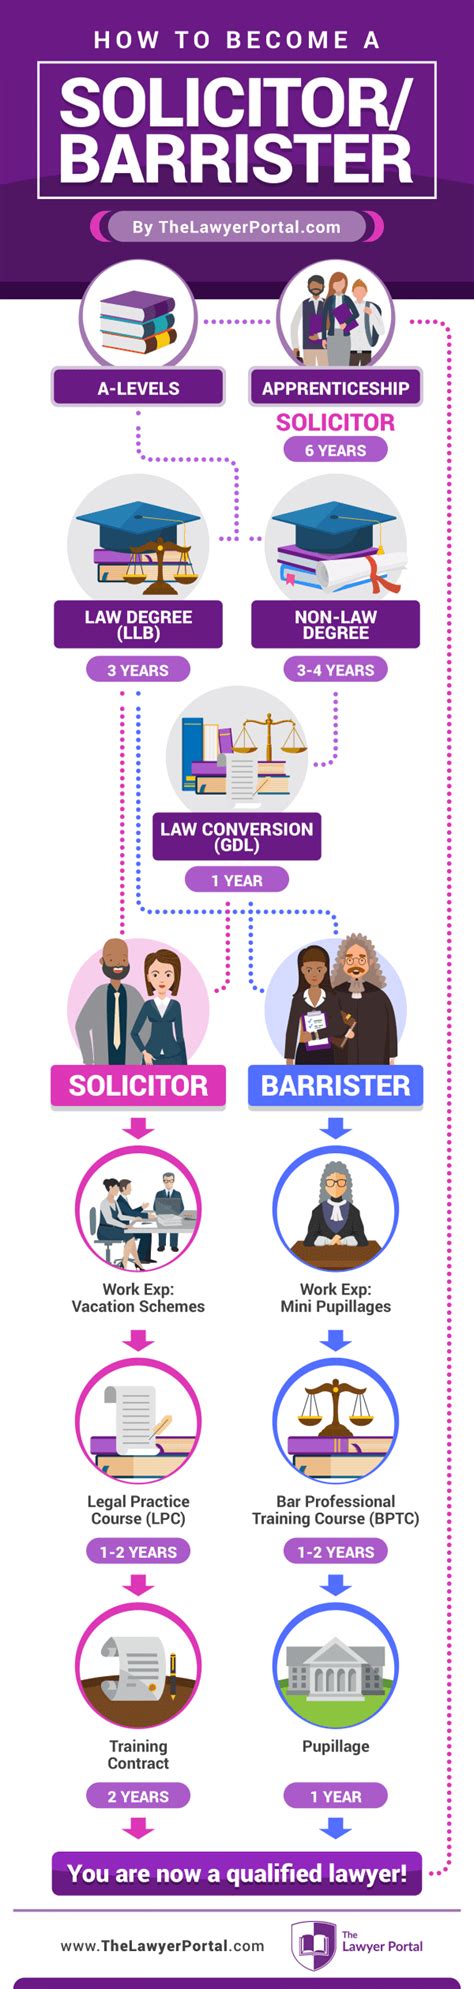 How To Qualify As A Lawyer A Visual Guide The Lawyer Portal